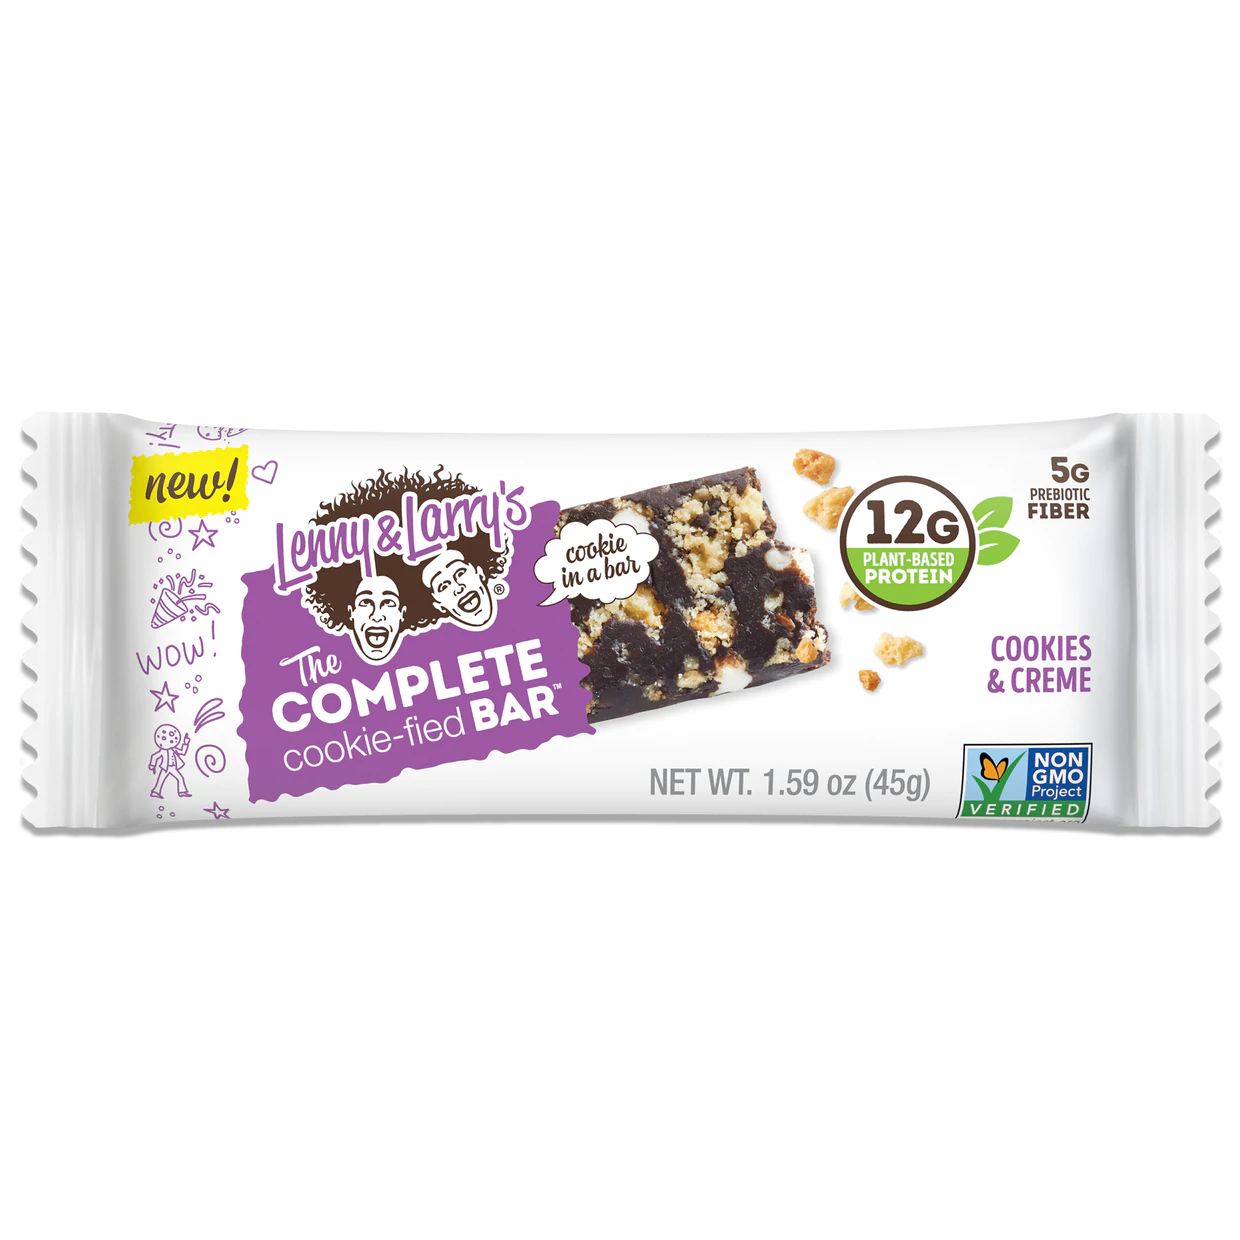 Lenny & Larry’s The Complete Cookie-fied Vegan Protein Bar (1 bar) Protein Snacks Cookie & Cream  BEST BY MARCH/2023 Lenny & Larry